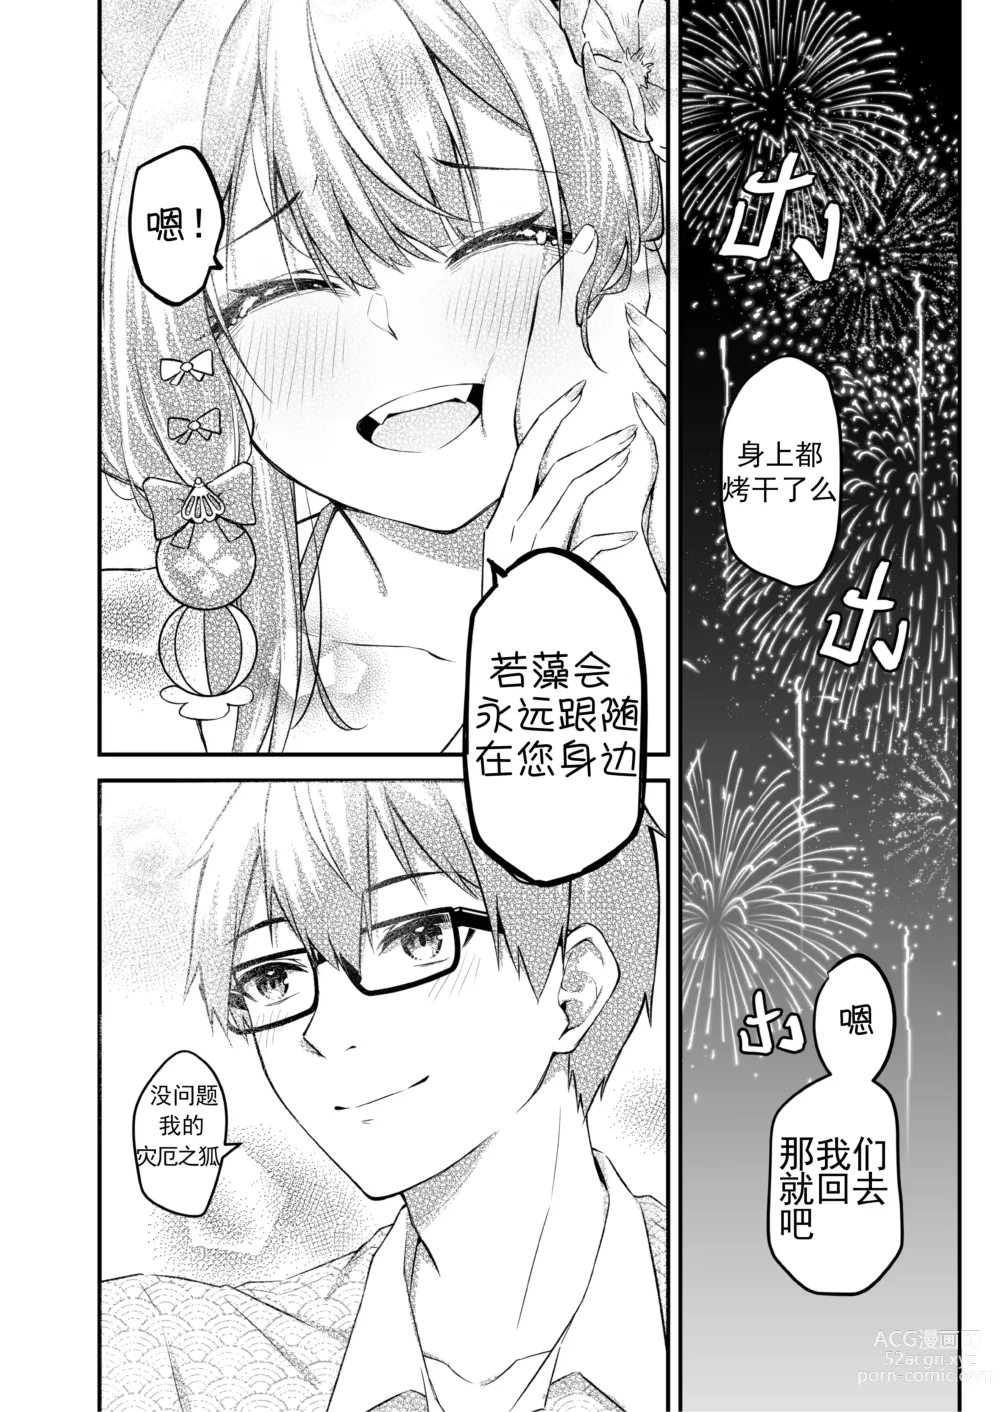 Page 13 of doujinshi OverLove From Wakamo Vol.2 (decensored)